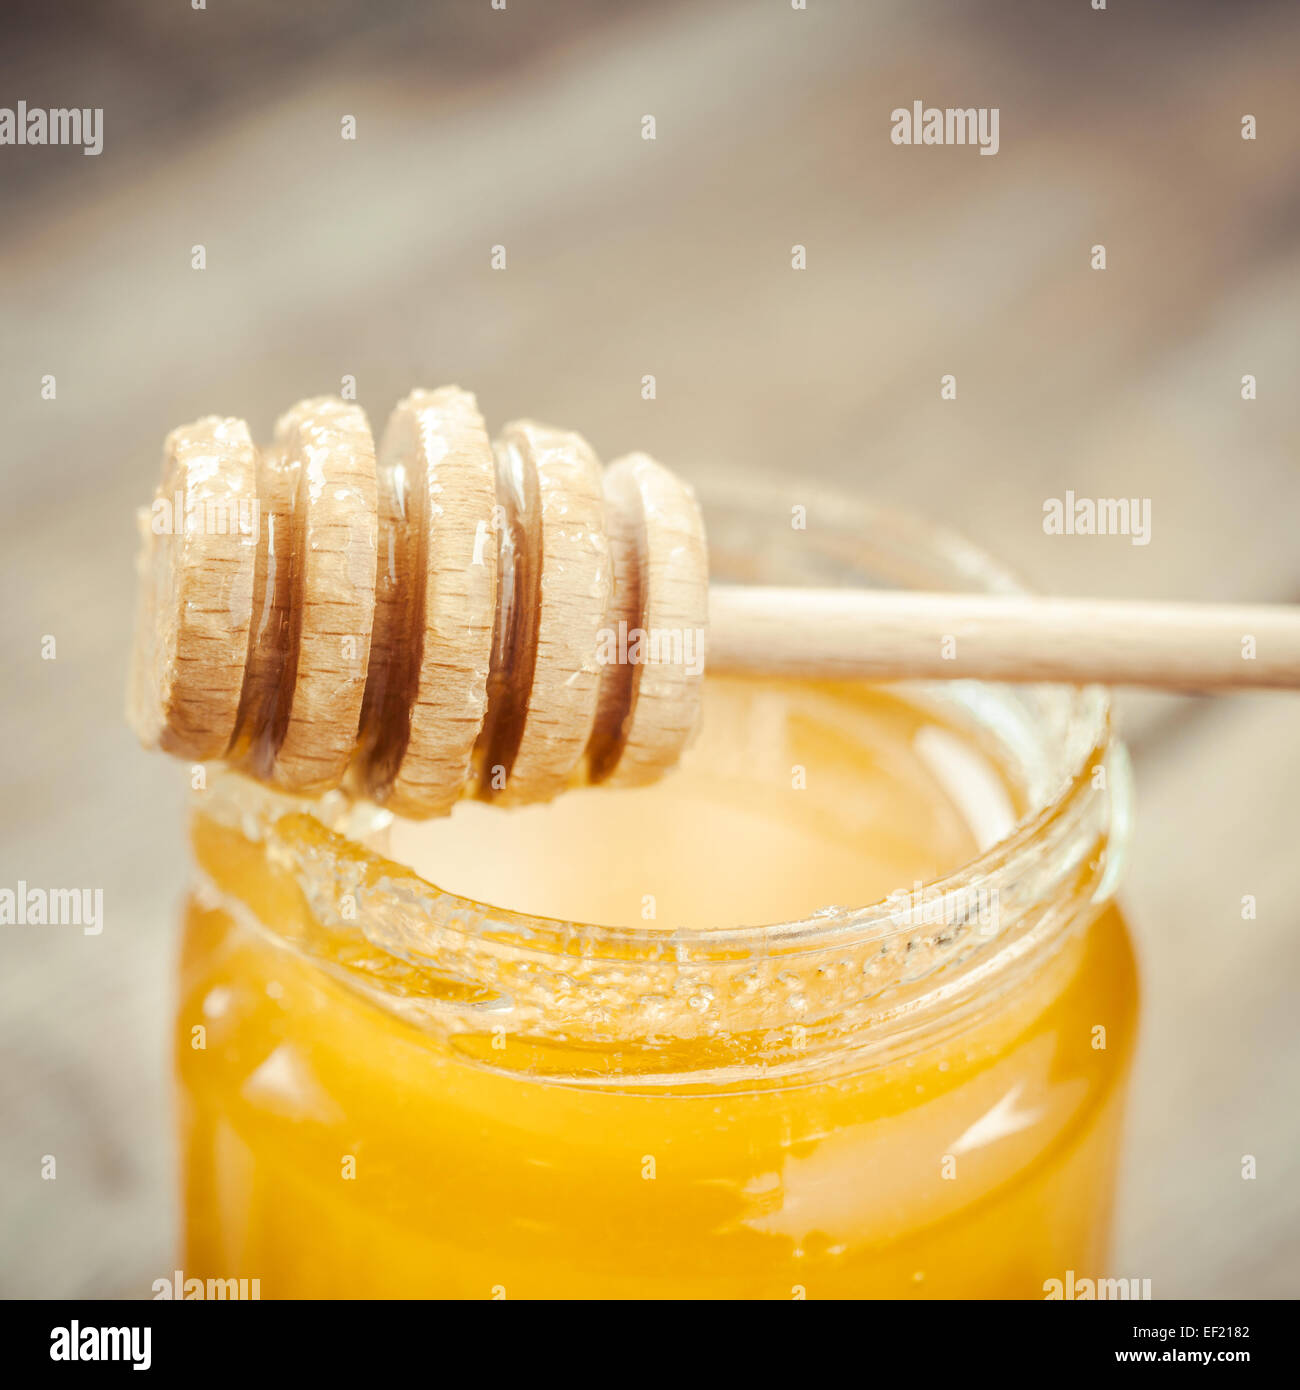 Honey in glass jar and wooden dipper close up Stock Photo